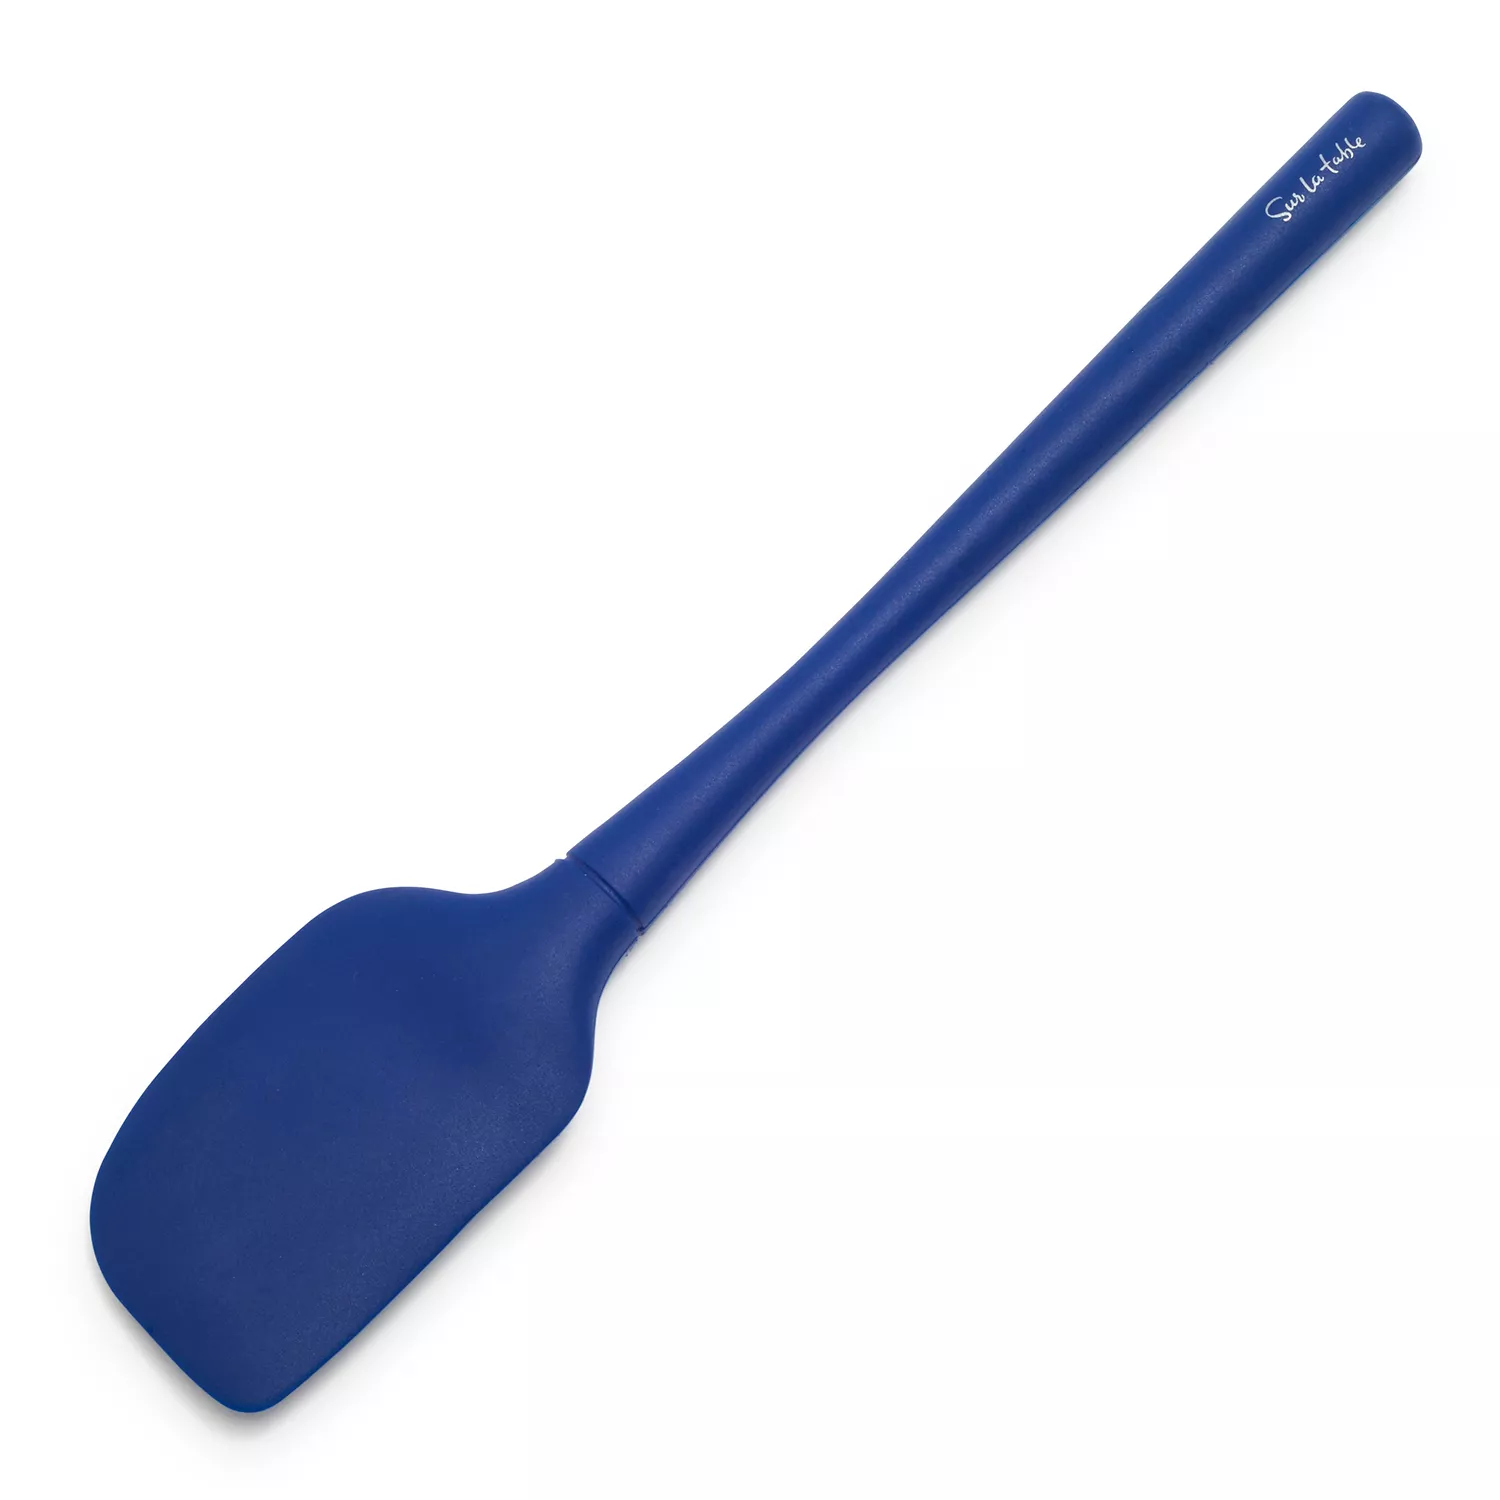 CURVED SCHOOL SPATULA - PURCHASE OF KITCHEN UTENSILS Choix longueur (cm)  24